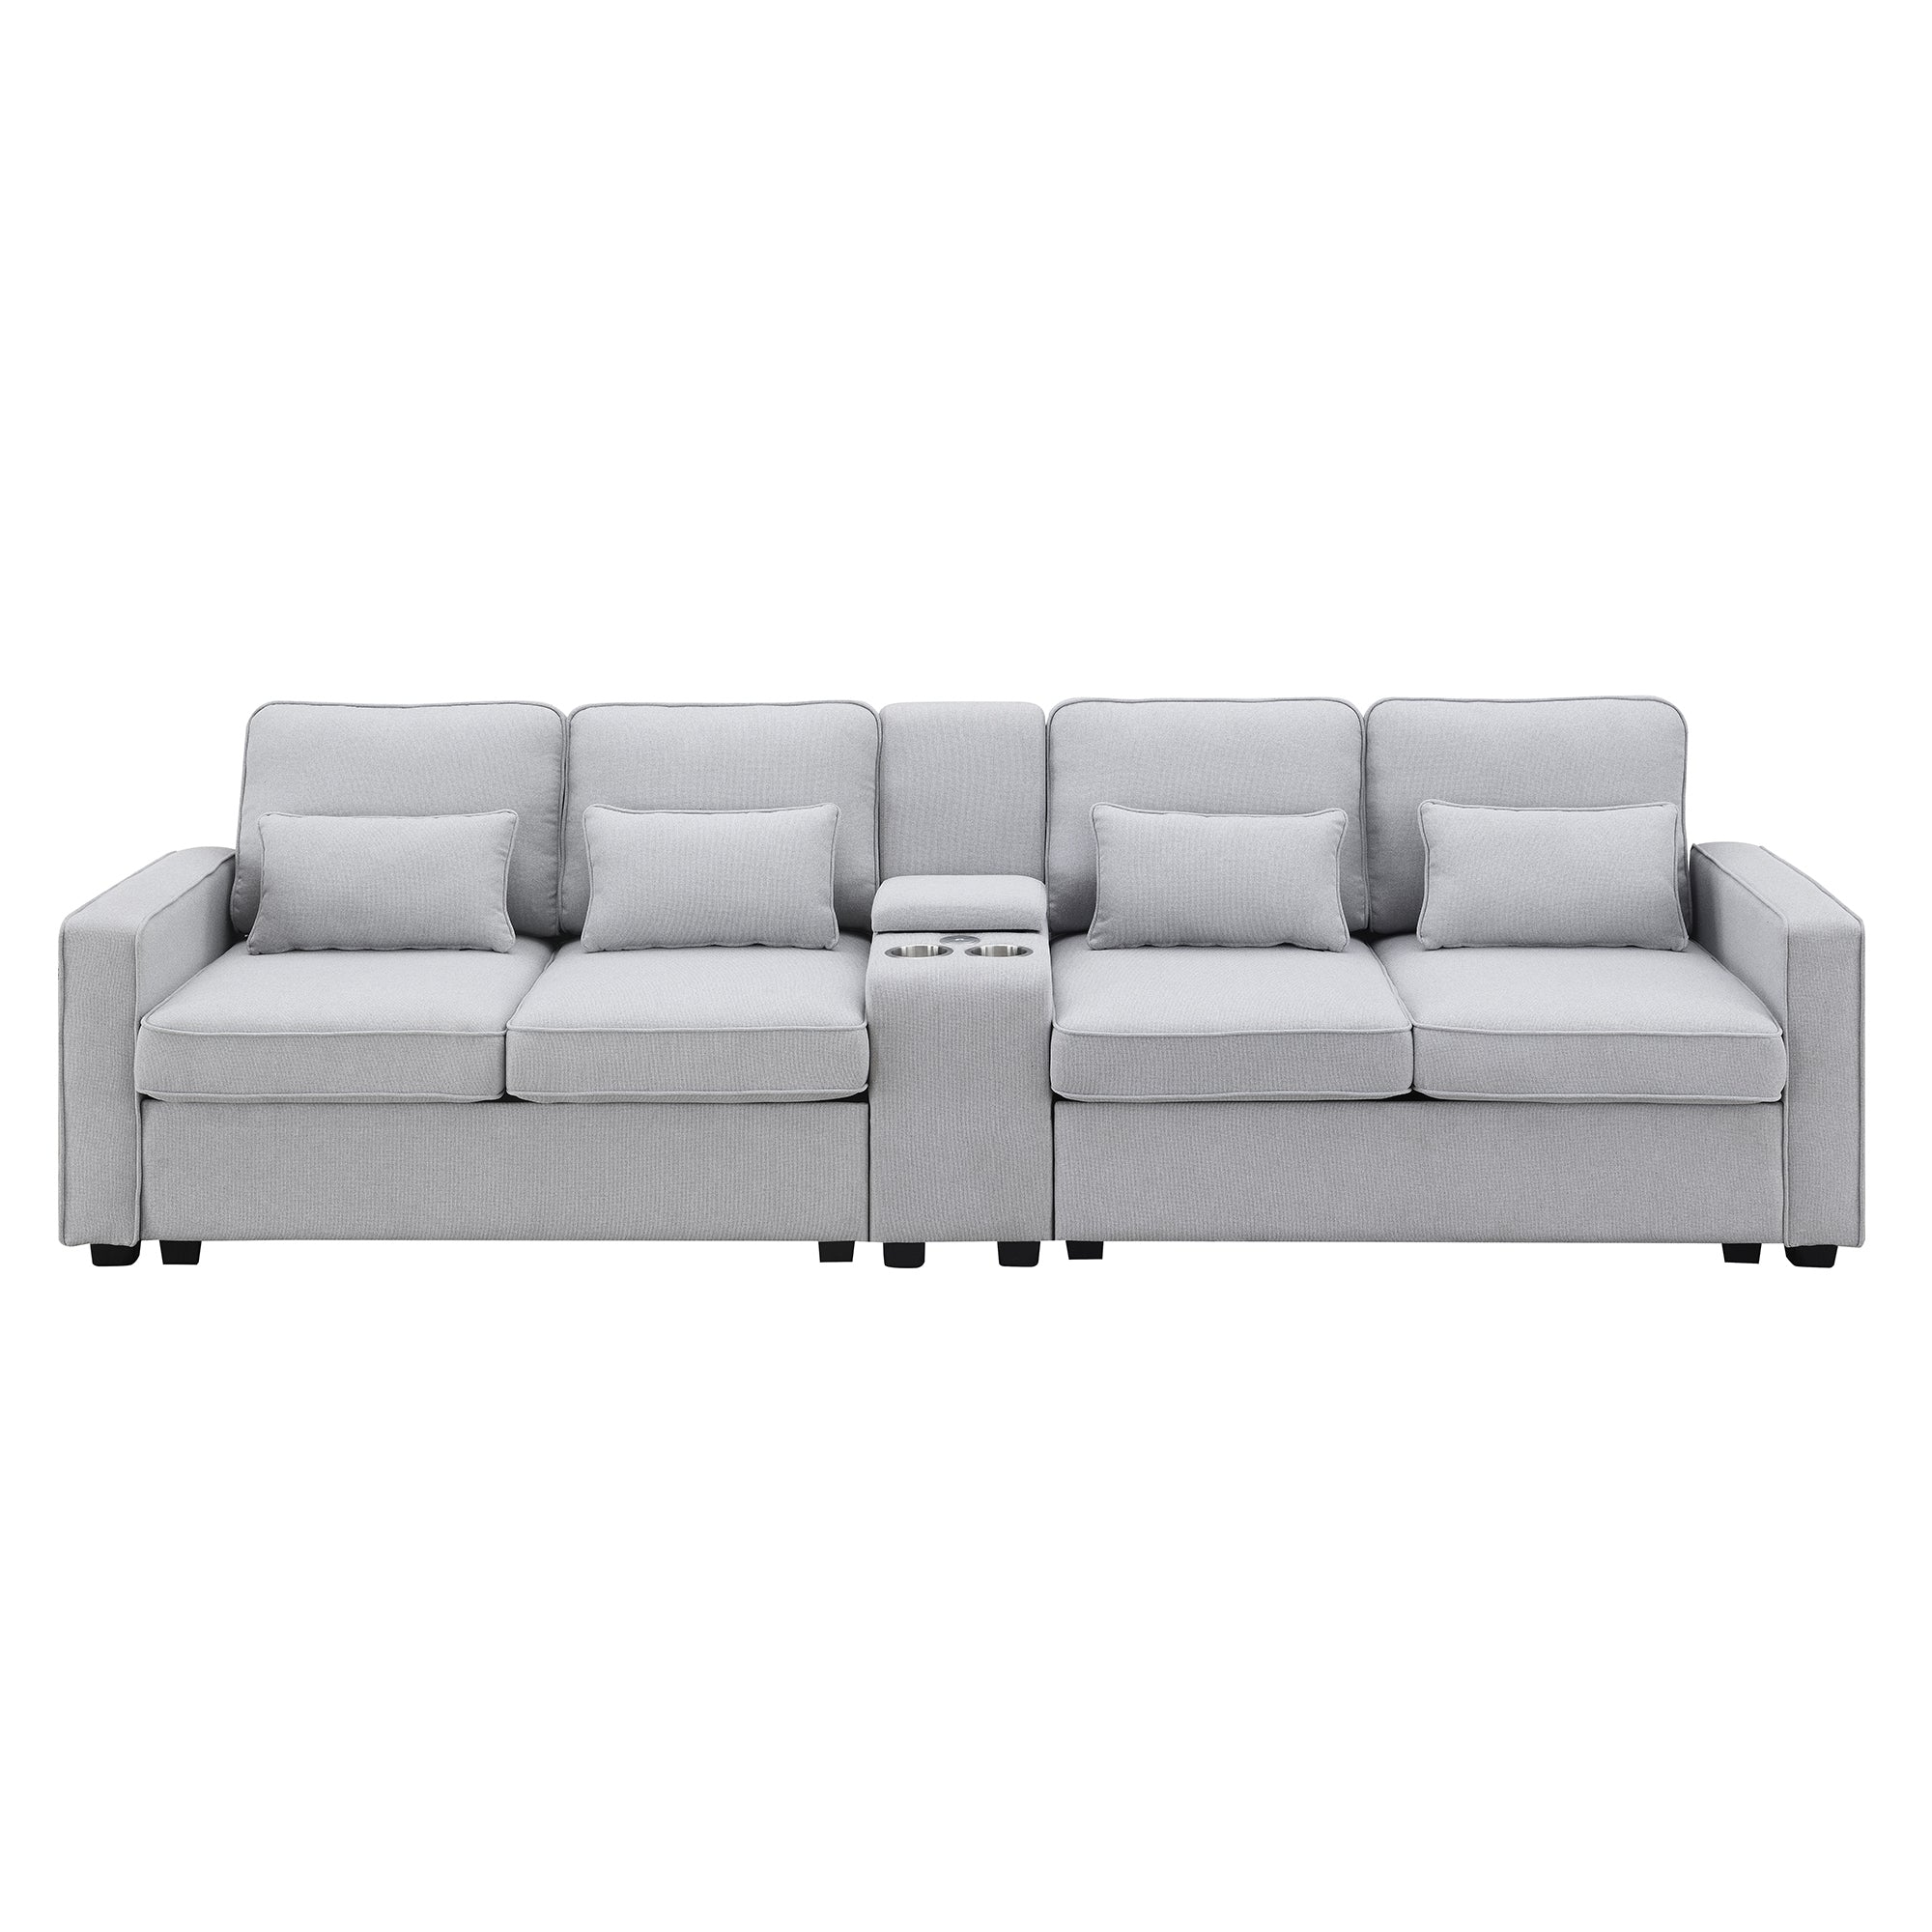 Clint 114.2 Light Gray Linen 4 Seater Sofa with Console, 2 Cupholders